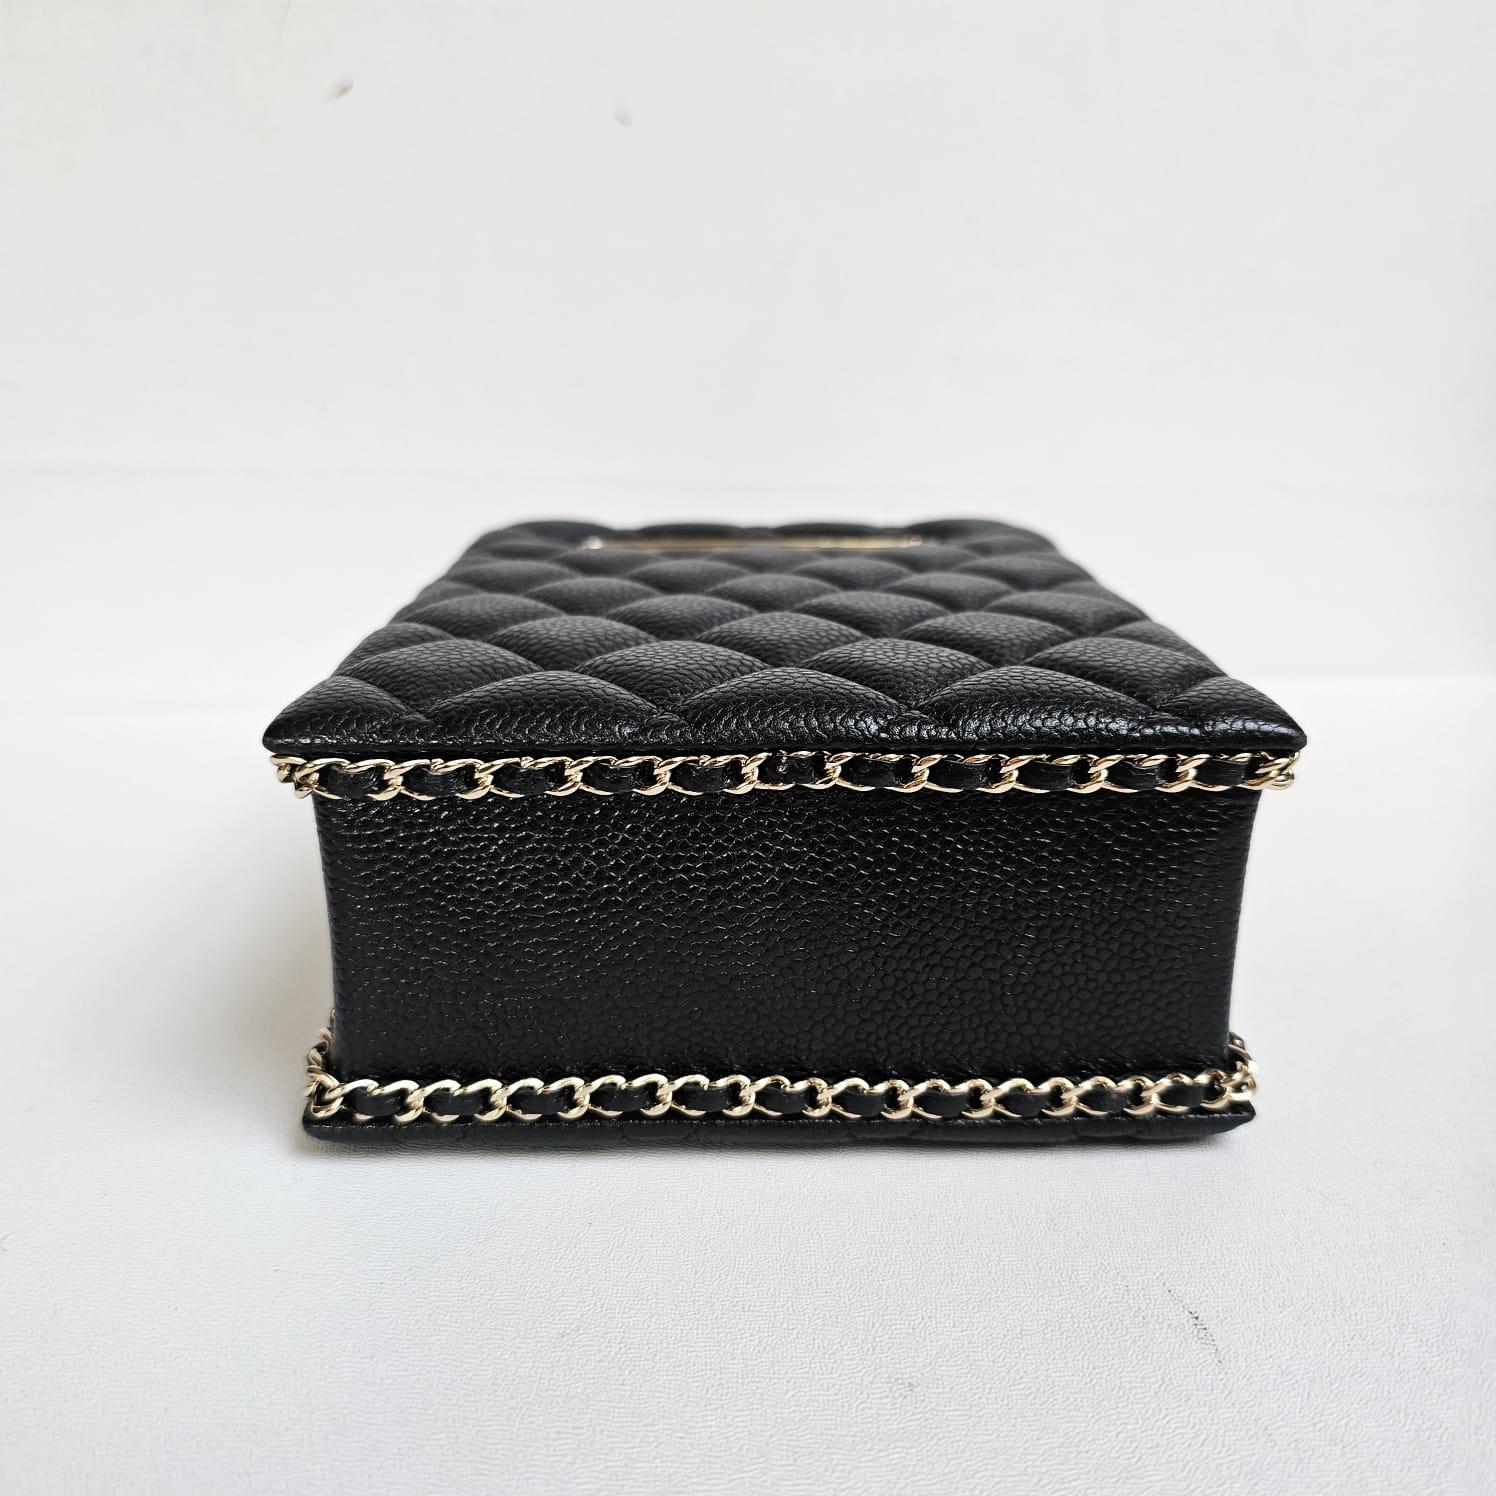 Rare chanel evening bag in black caviar leather. Overall still in excellent condition, very rarely worn. Slight scratches on the lambskin lining. Already chip. Comes with dust bag and box. Can be worn top handle or crossbody.